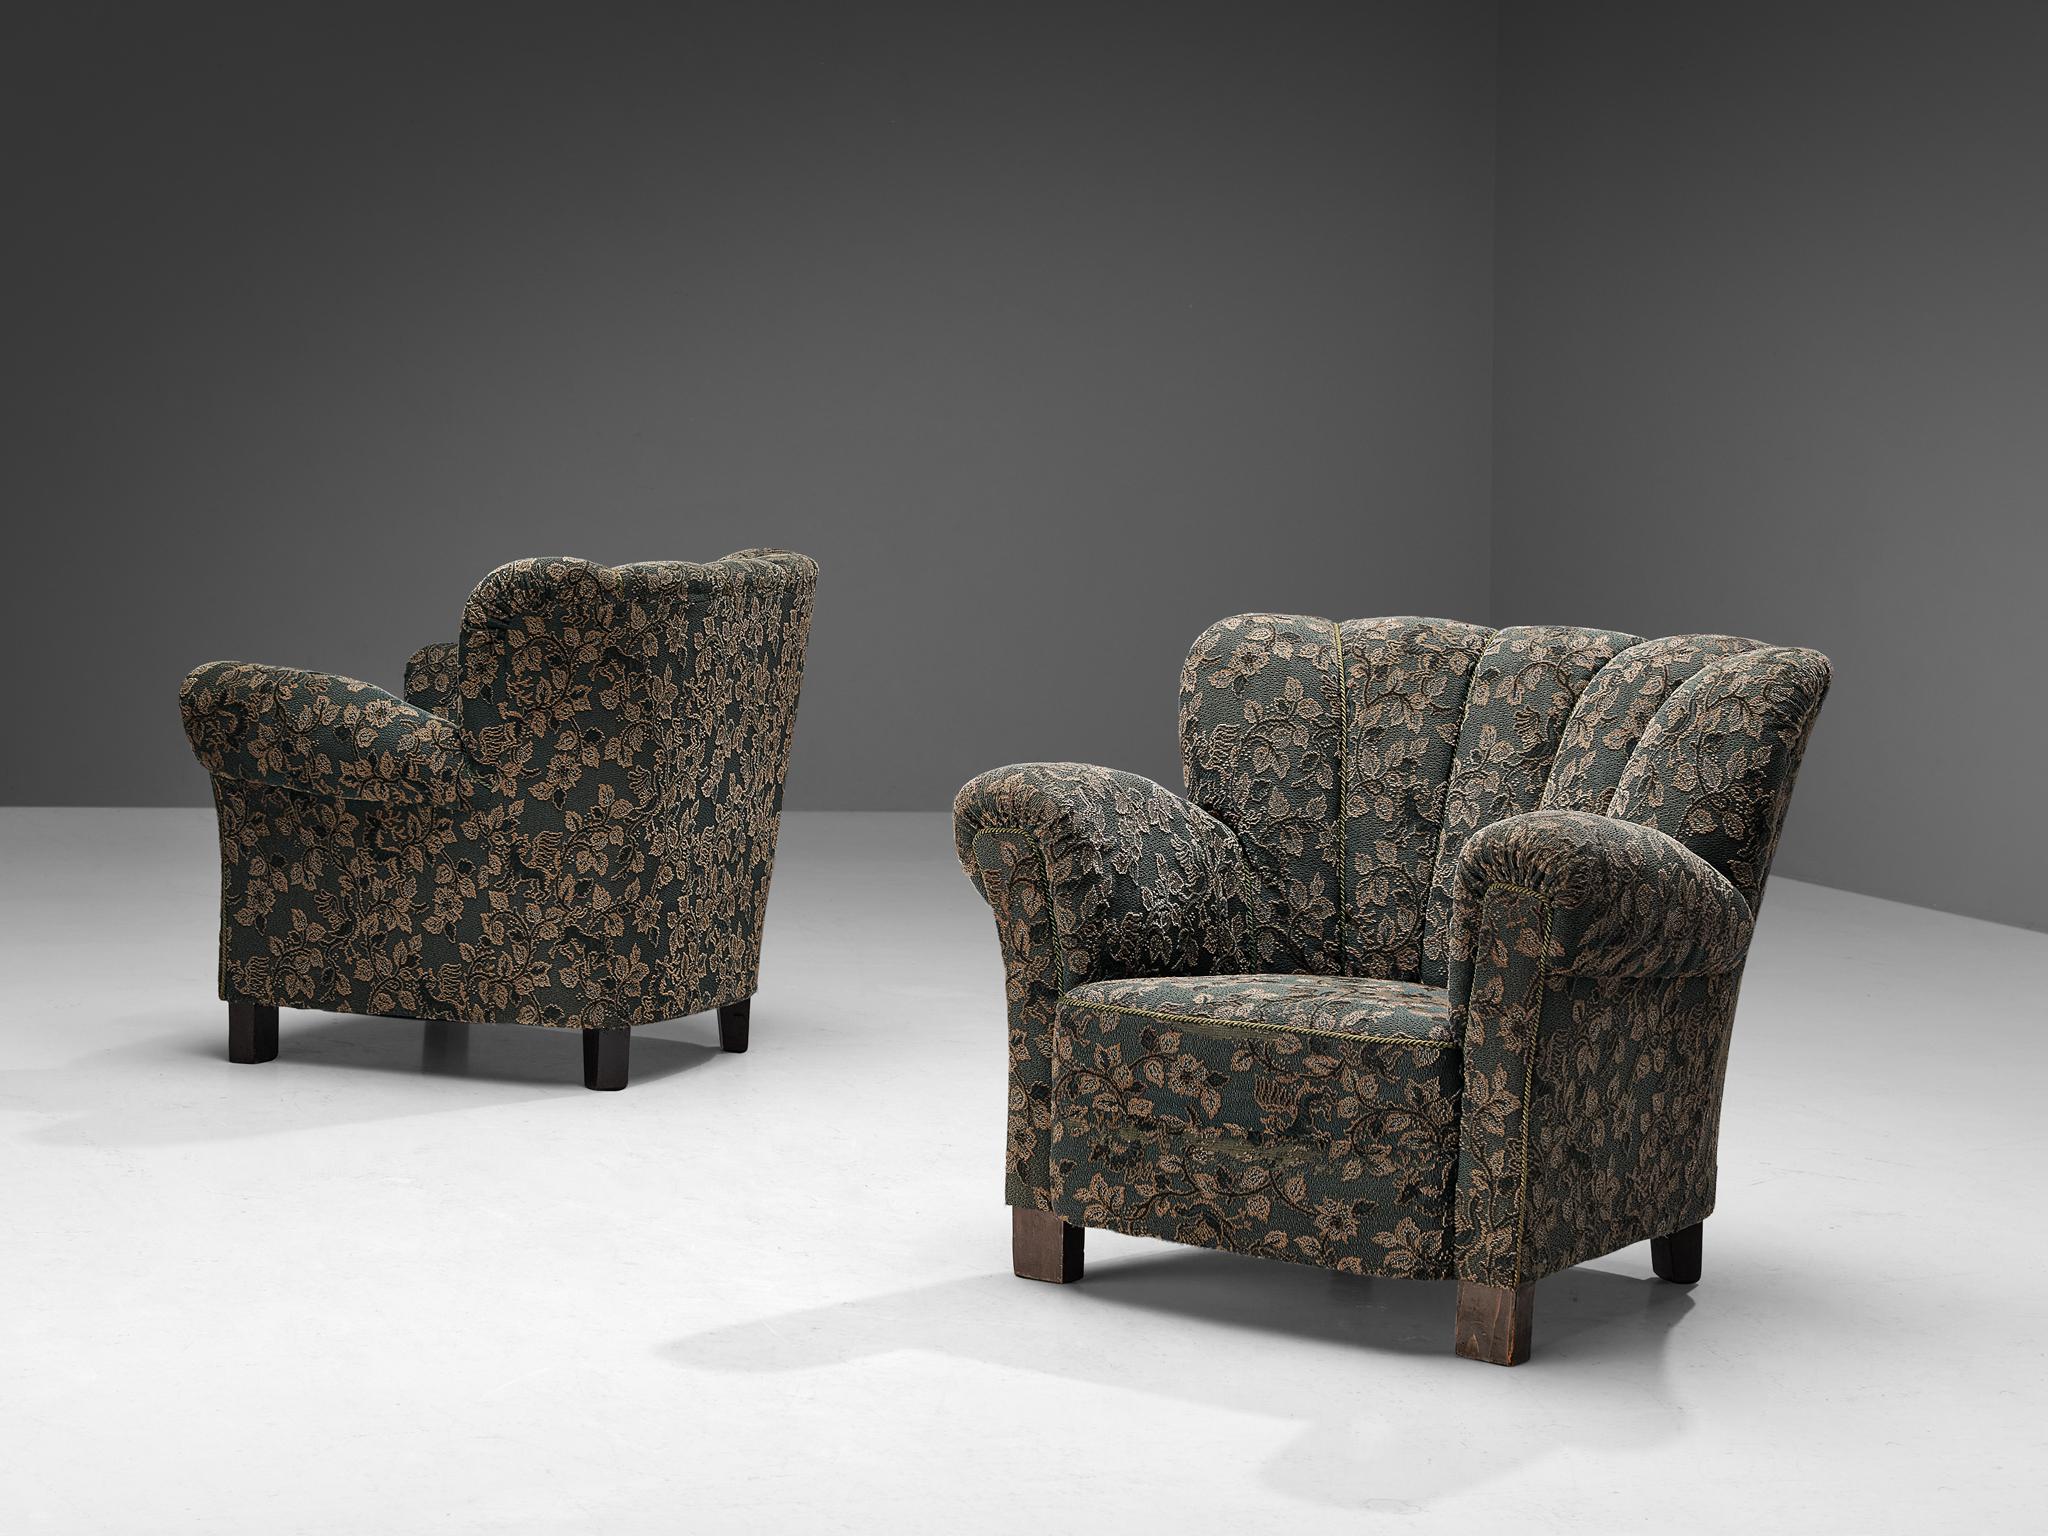 Pair of club chairs, fabric, stained beech, Czech Republic, 1950s.

These chairs are beautifully constructed featuring a shell shaped frame composed of diverging lines that brings a more open and inviting look to the quite solid design. The